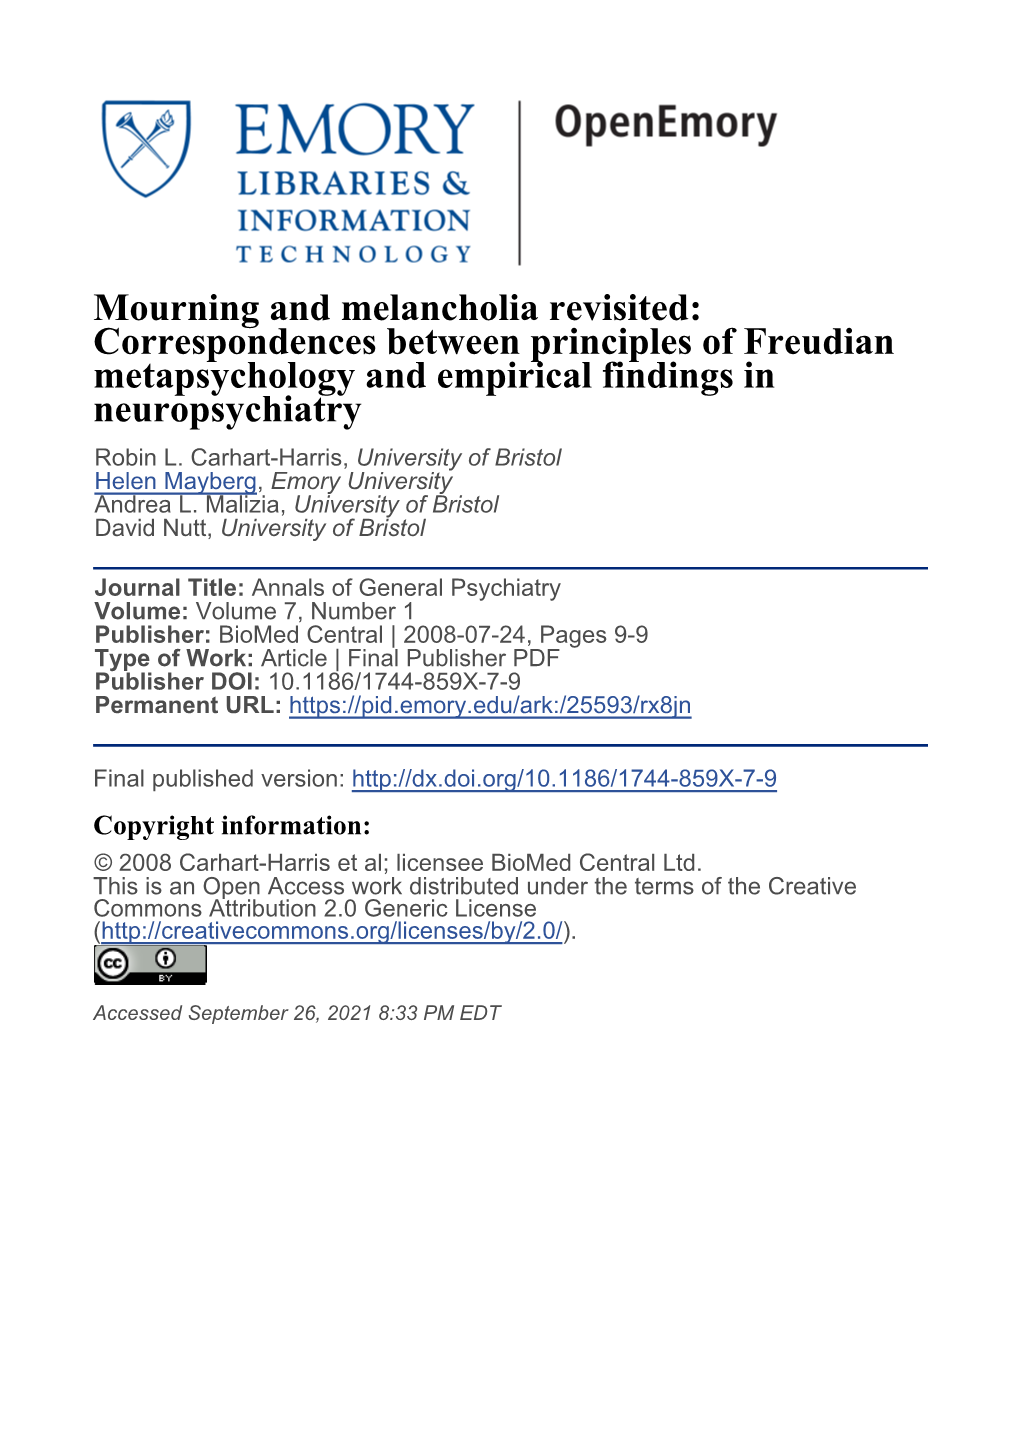 Mourning and Melancholia Revisited: Correspondences Between Principles of Freudian Metapsychology and Empirical Findings in Neuropsychiatry Robin L